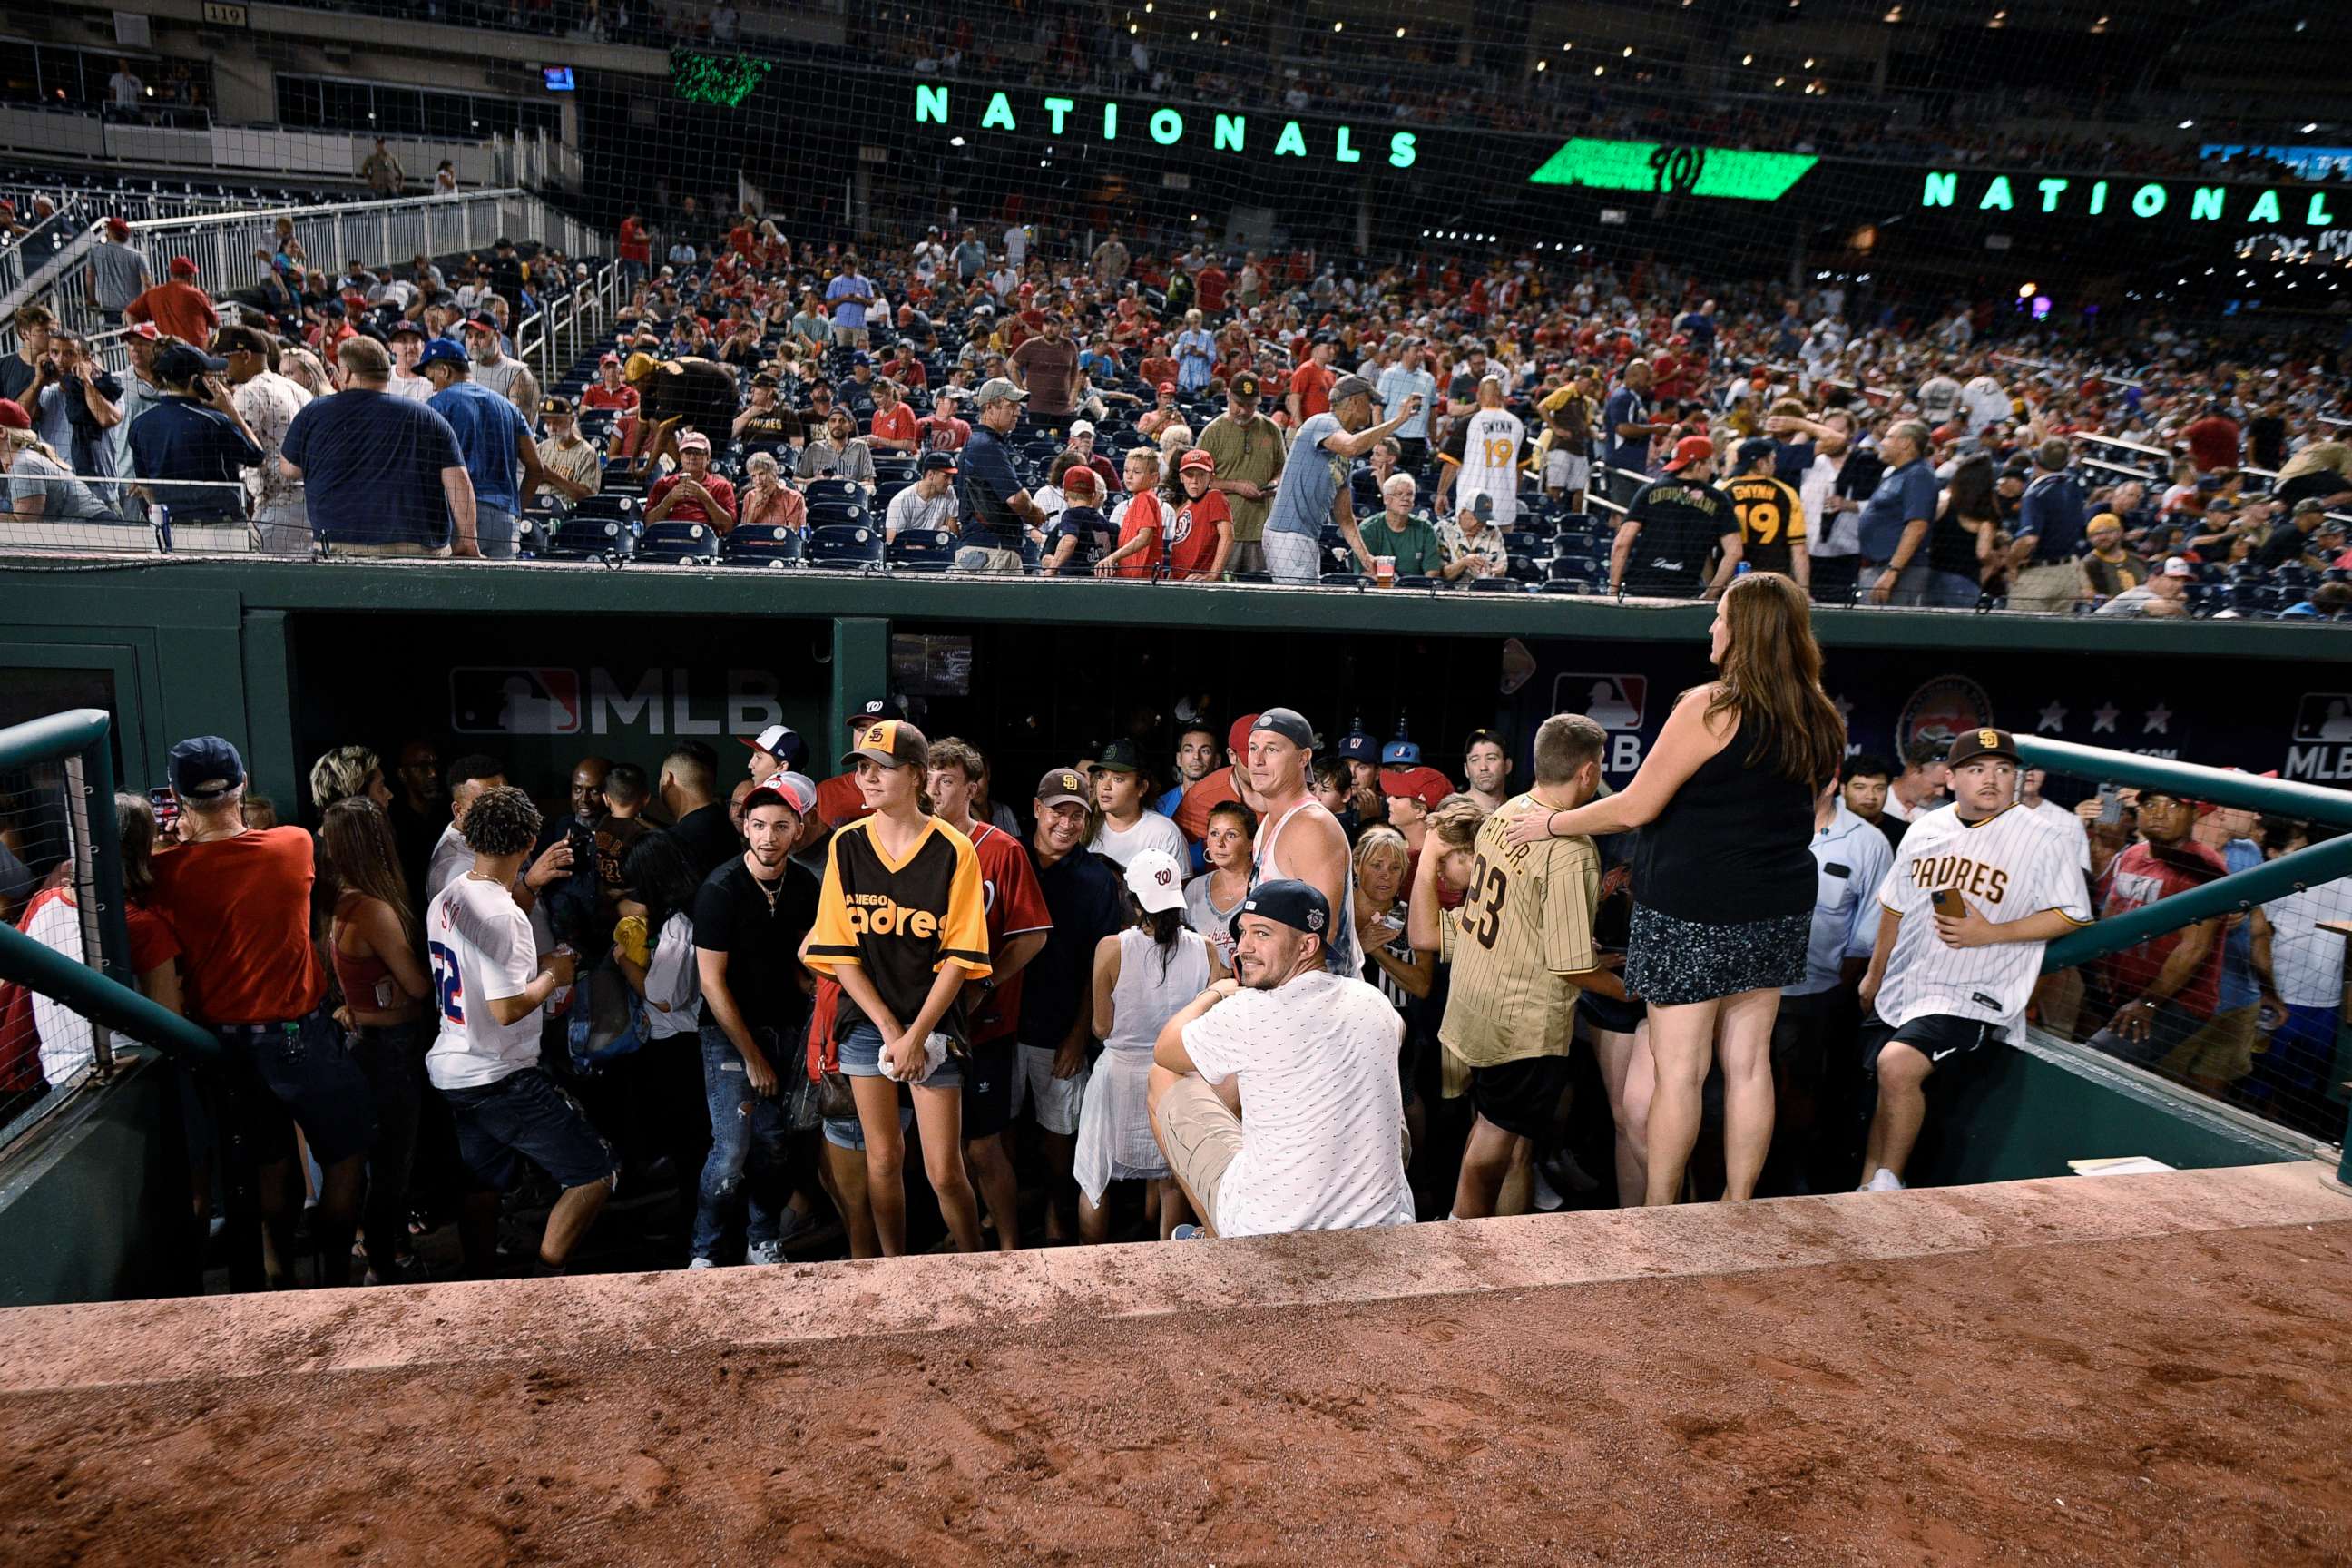 PHOTO: Spectators stand in the visiting team dugout during a stoppage in play due to an incident near the ballpark in the sixth inning of a baseball game between the Washington Nationals and the San Diego Padres, Saturday, July 17, 2021, in Washington.